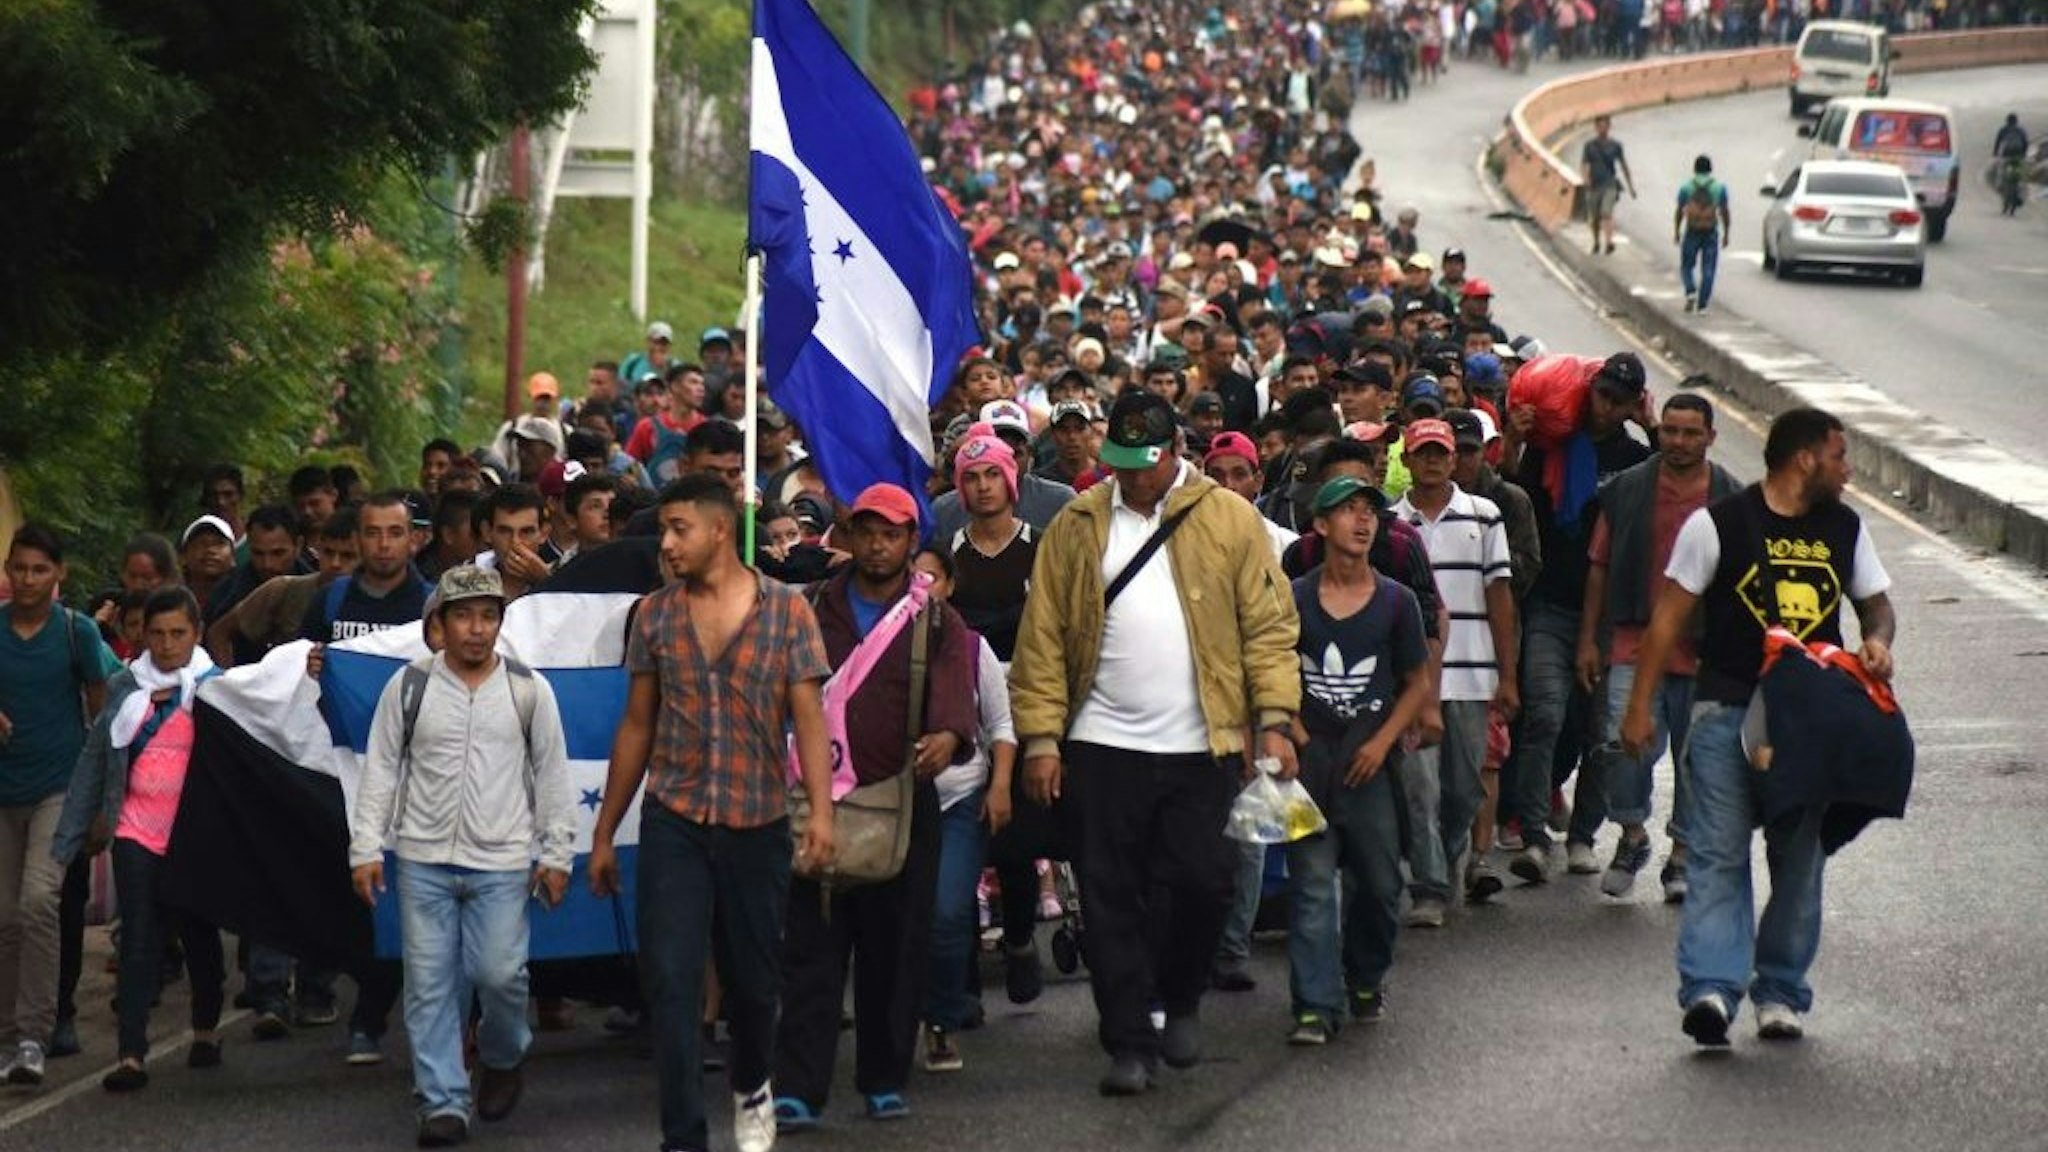 Honduran migrants take part in a caravan towards the United States in Chiquimula, Guatemala on October 17, 2018. - A migrant caravan set out on October 13 from the impoverished, violence-plagued country and was headed north on the long journey through Guatemala and Mexico to the US border.